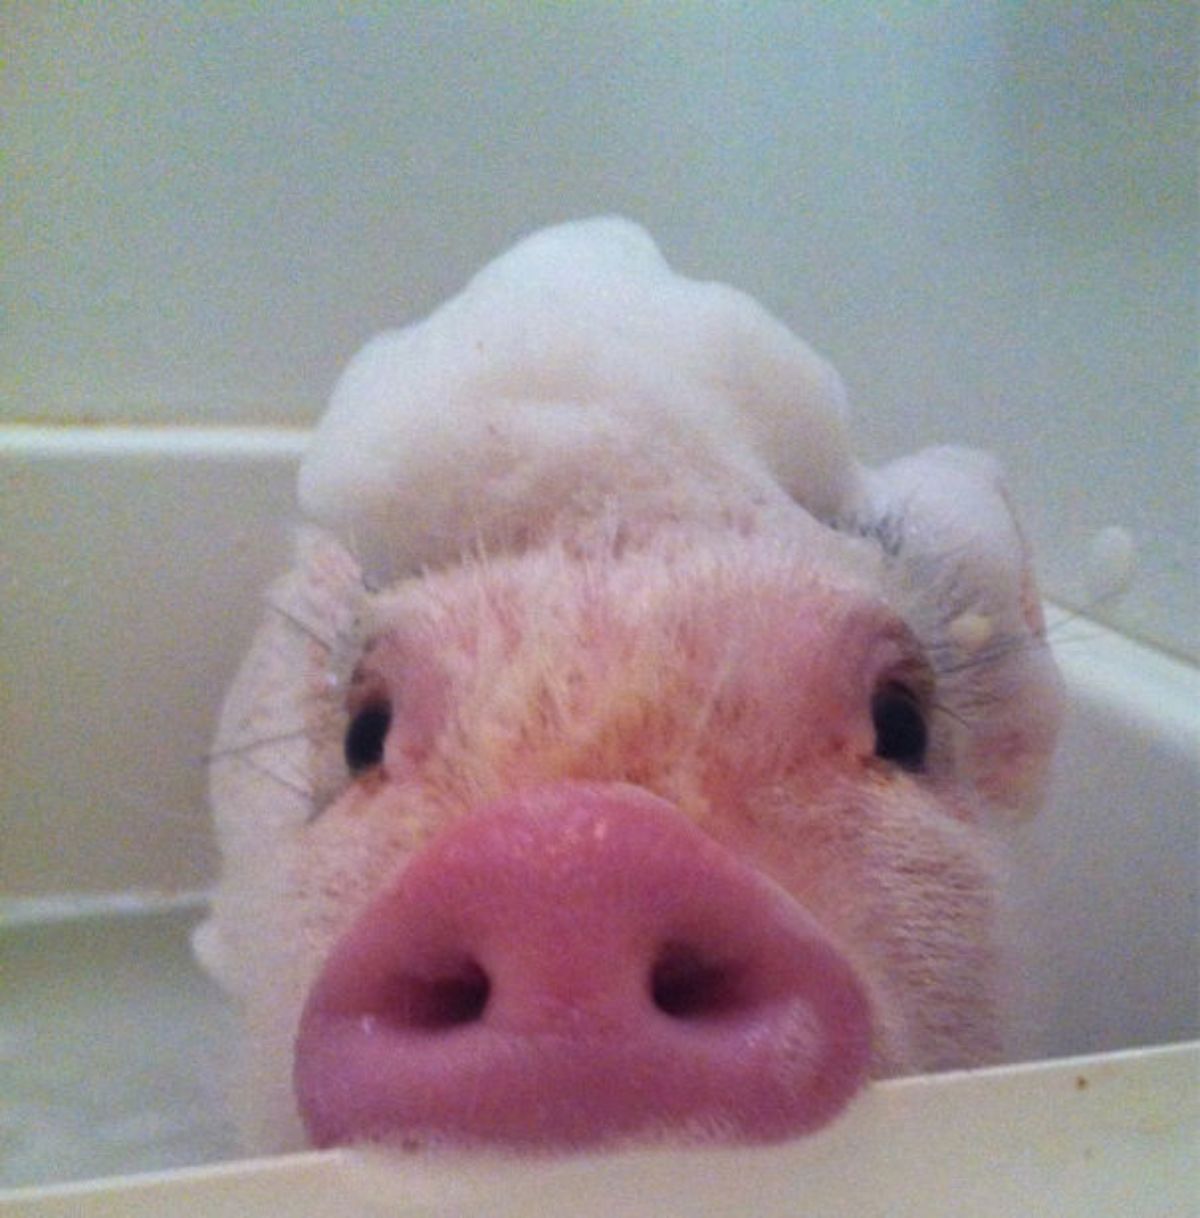 pink piglet in a bathtub with soap suds on the head